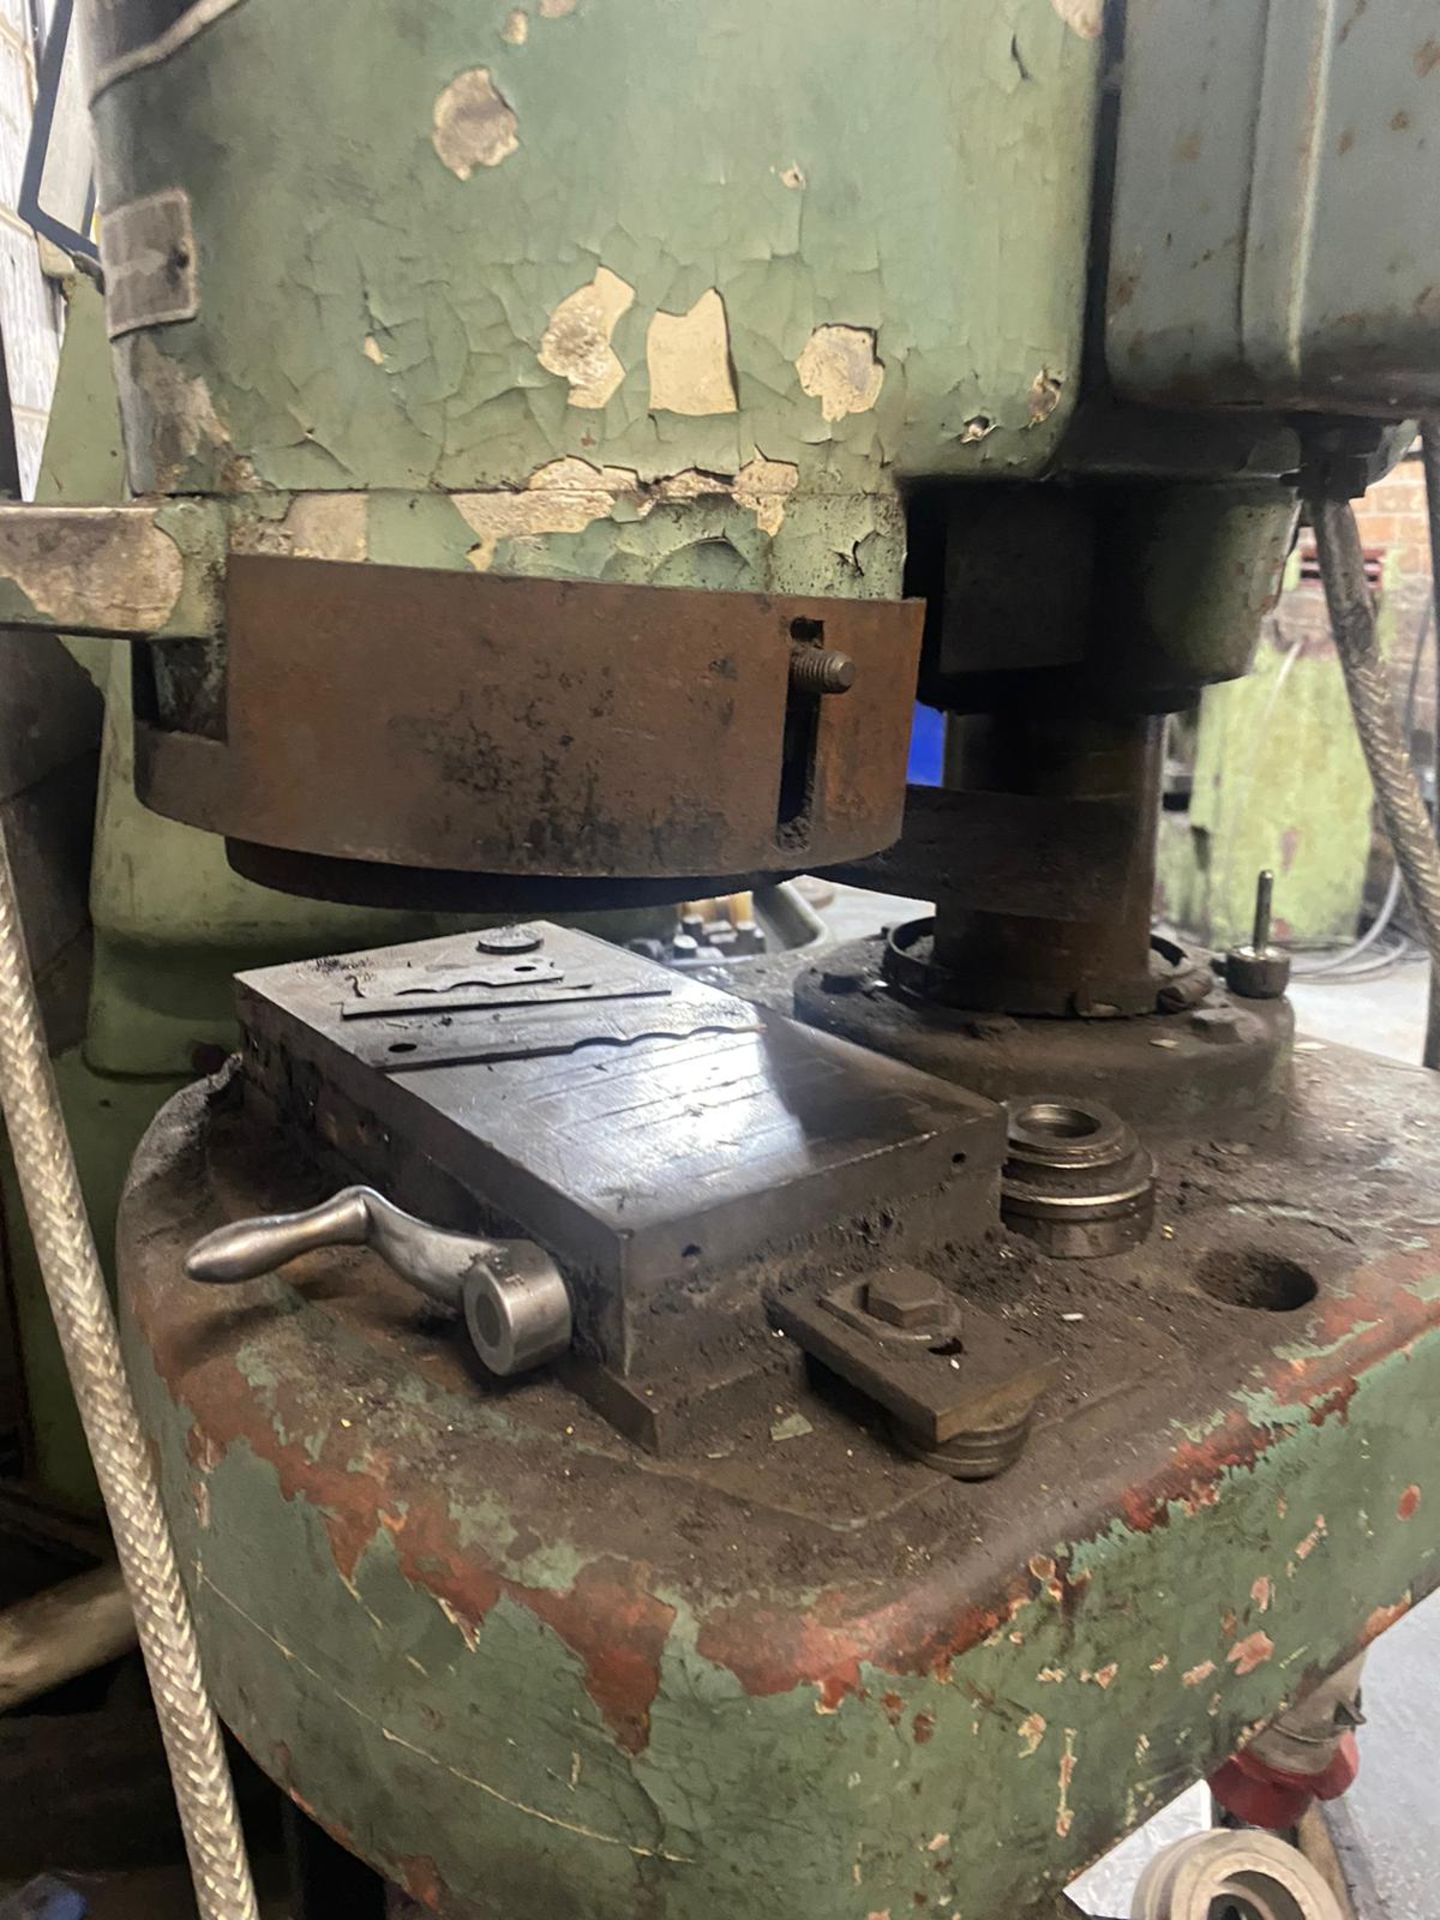 VALVE SHIM GRINDING MACHINE - SINGLE PHASE - MAGNETIC BED - WORKS AS IT SHOULD - Image 2 of 2